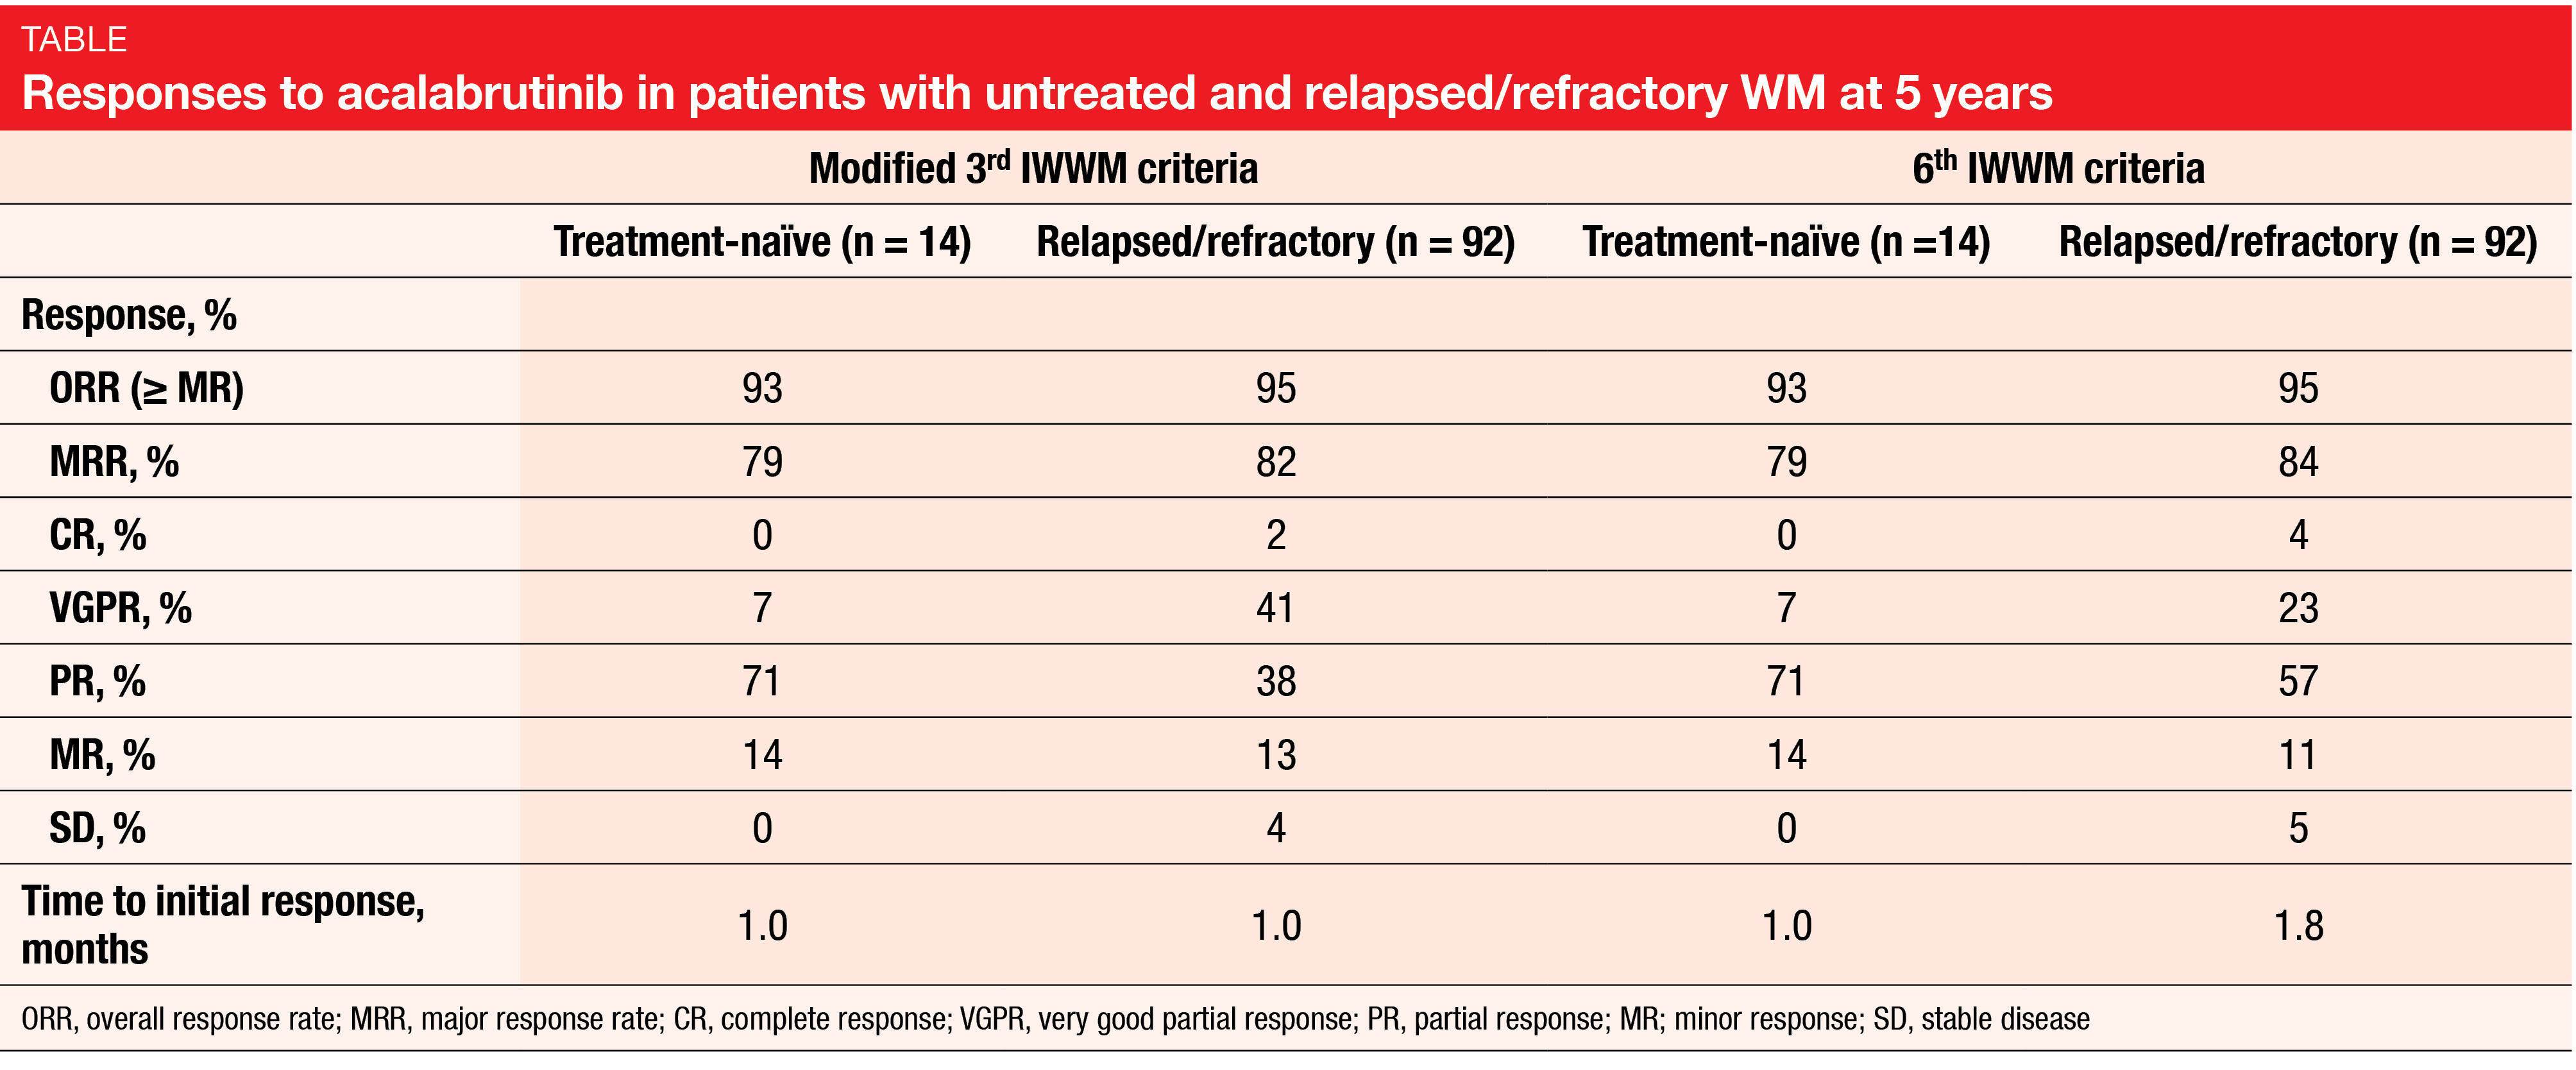 Table Responses to acalabrutinib in patients with untreated and relapsed/refractory WM at 5 years